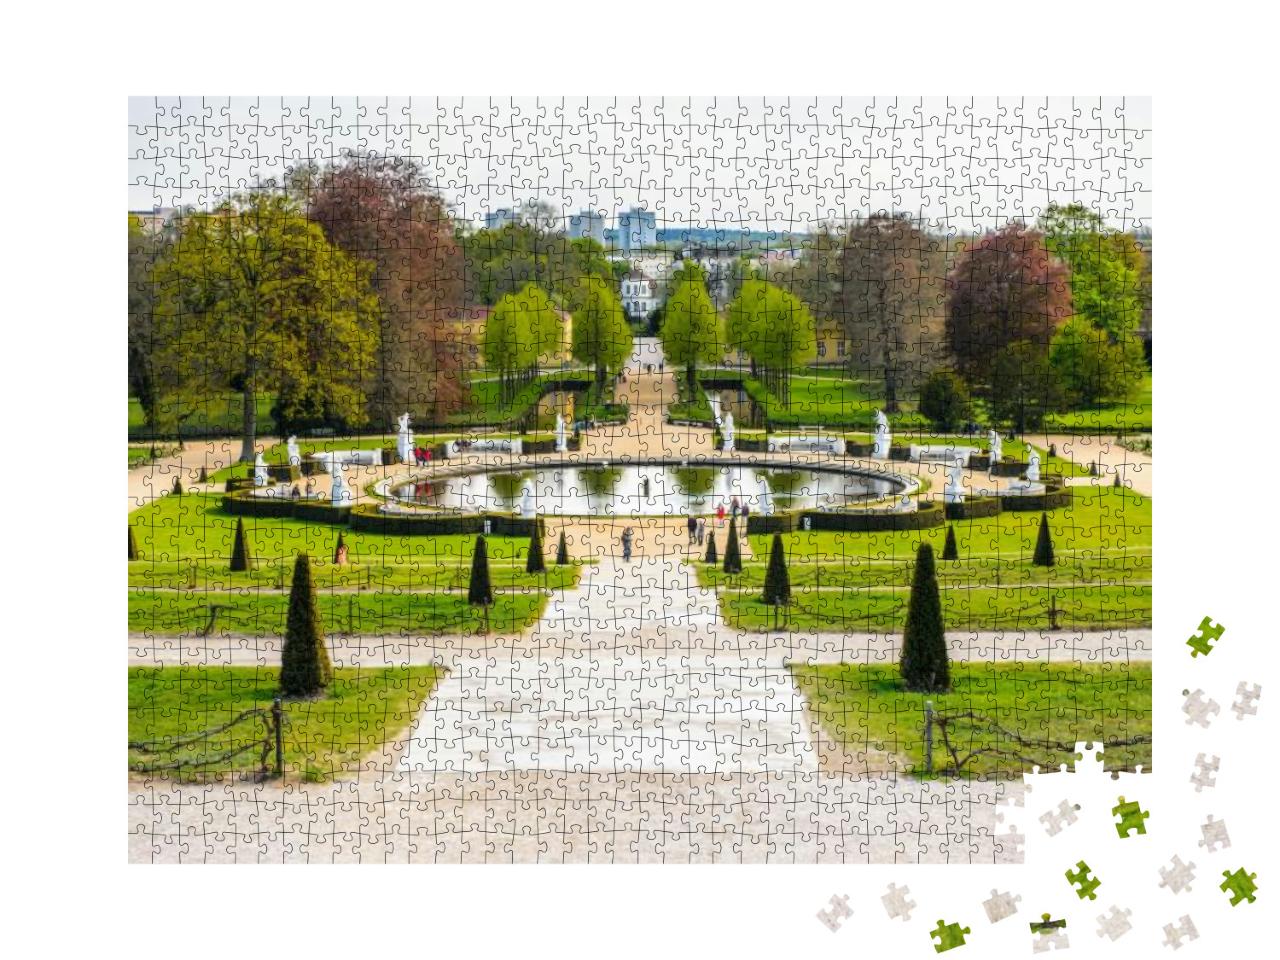 Garden Near the Sanssouci Palace of Potsdam, Germany... Jigsaw Puzzle with 1000 pieces